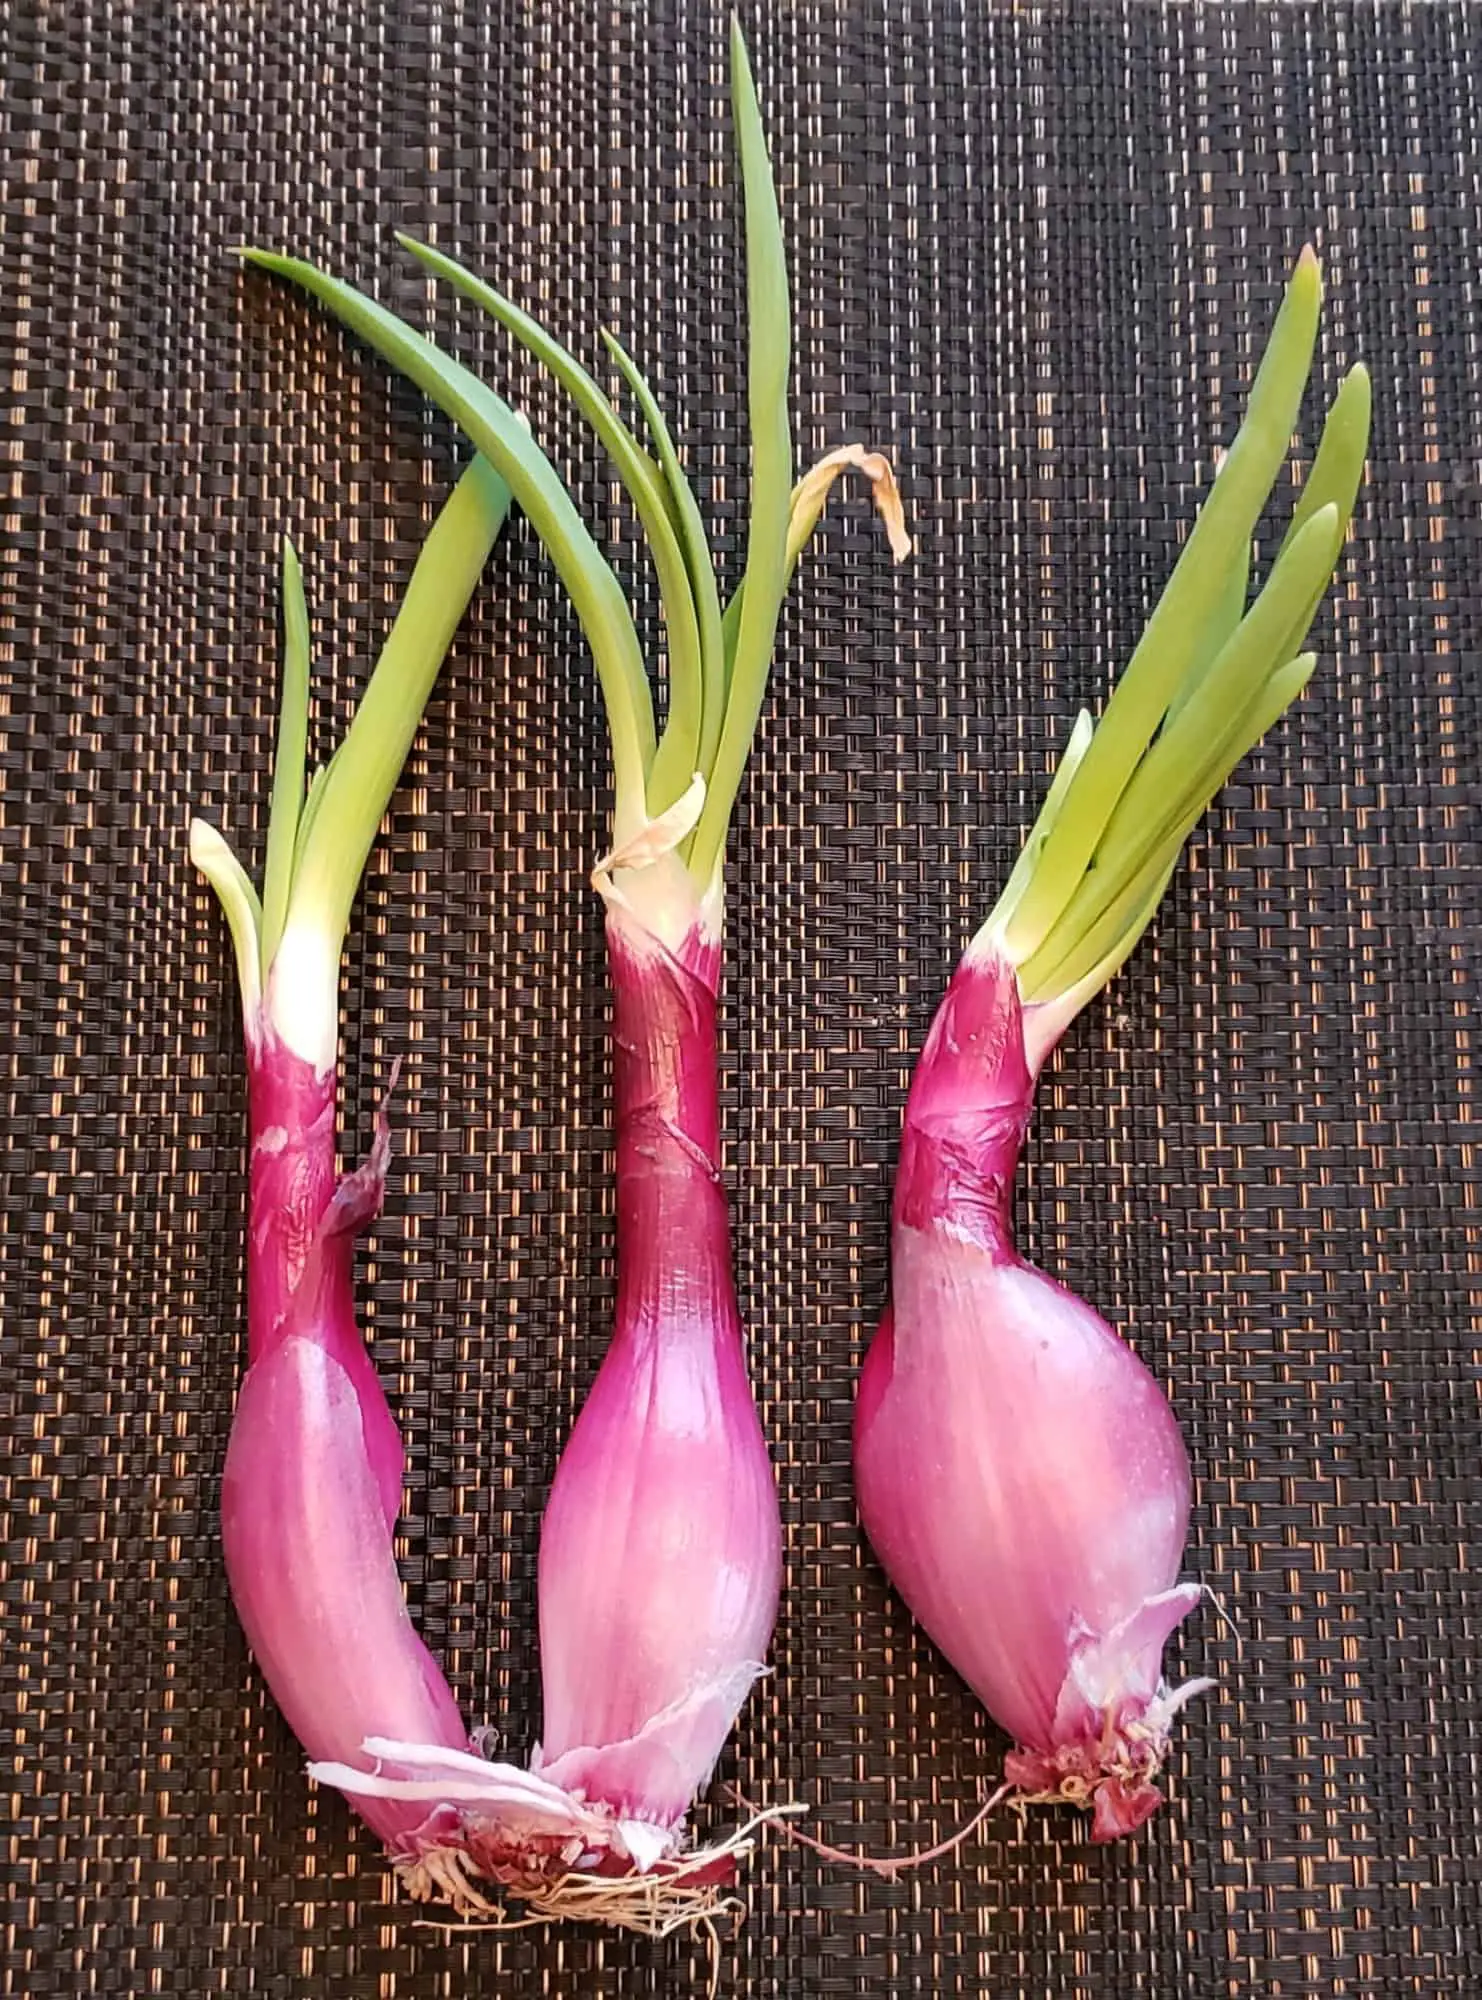 What To Do With Sprouted Onions